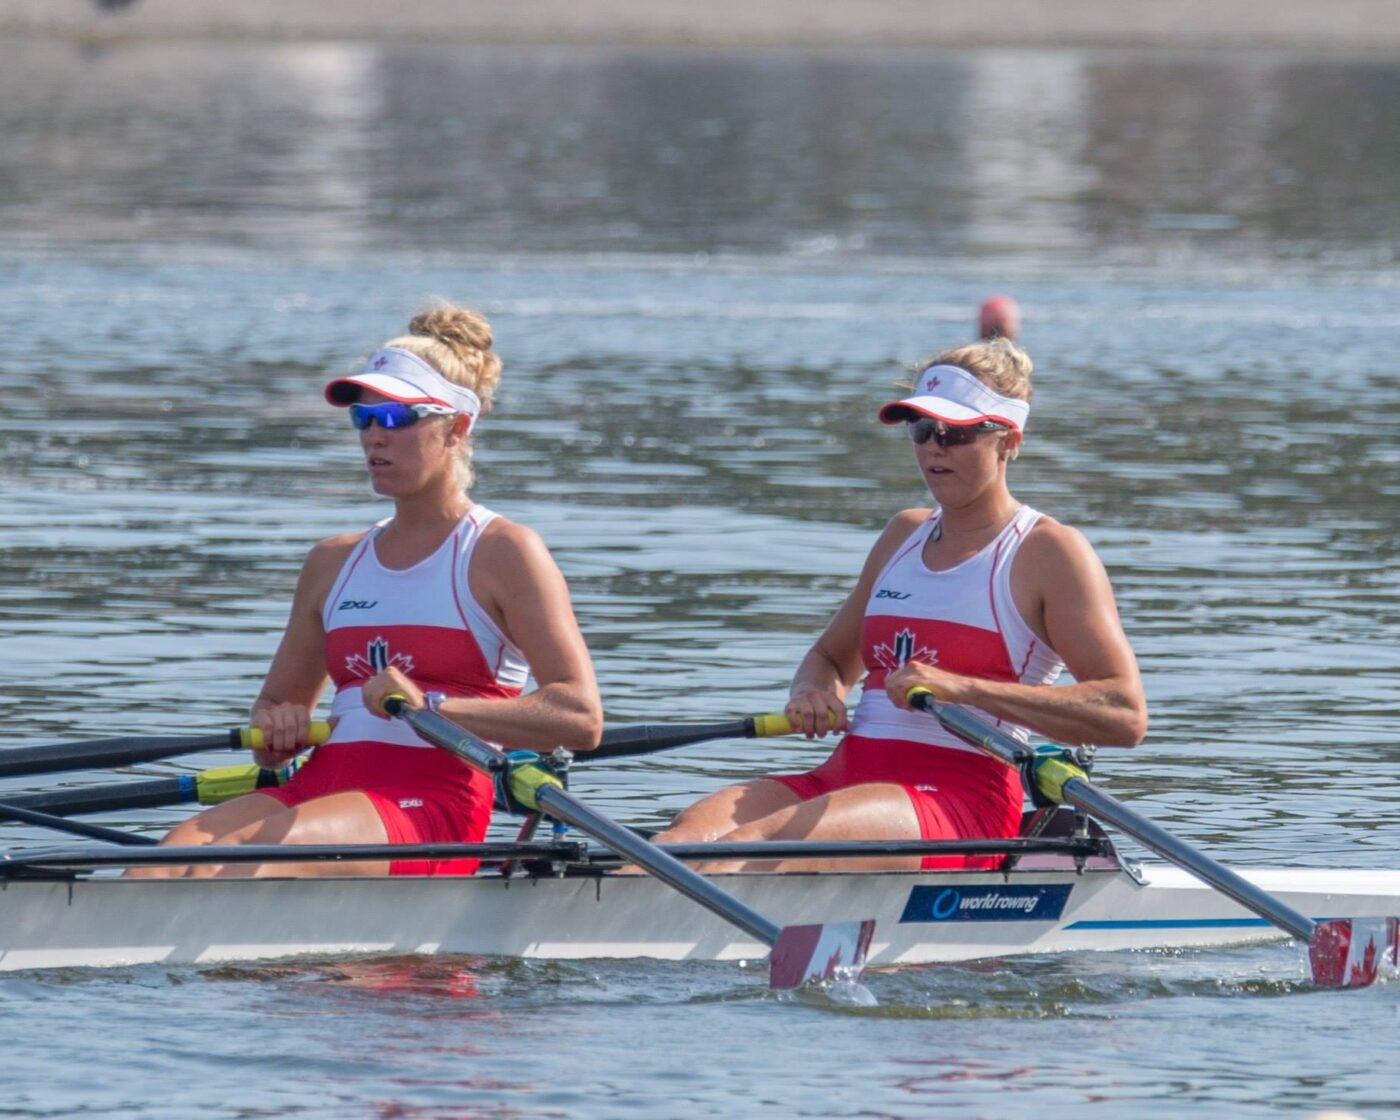 Two women wearing red and white uniforms and visors rigorously rowing on calm water.